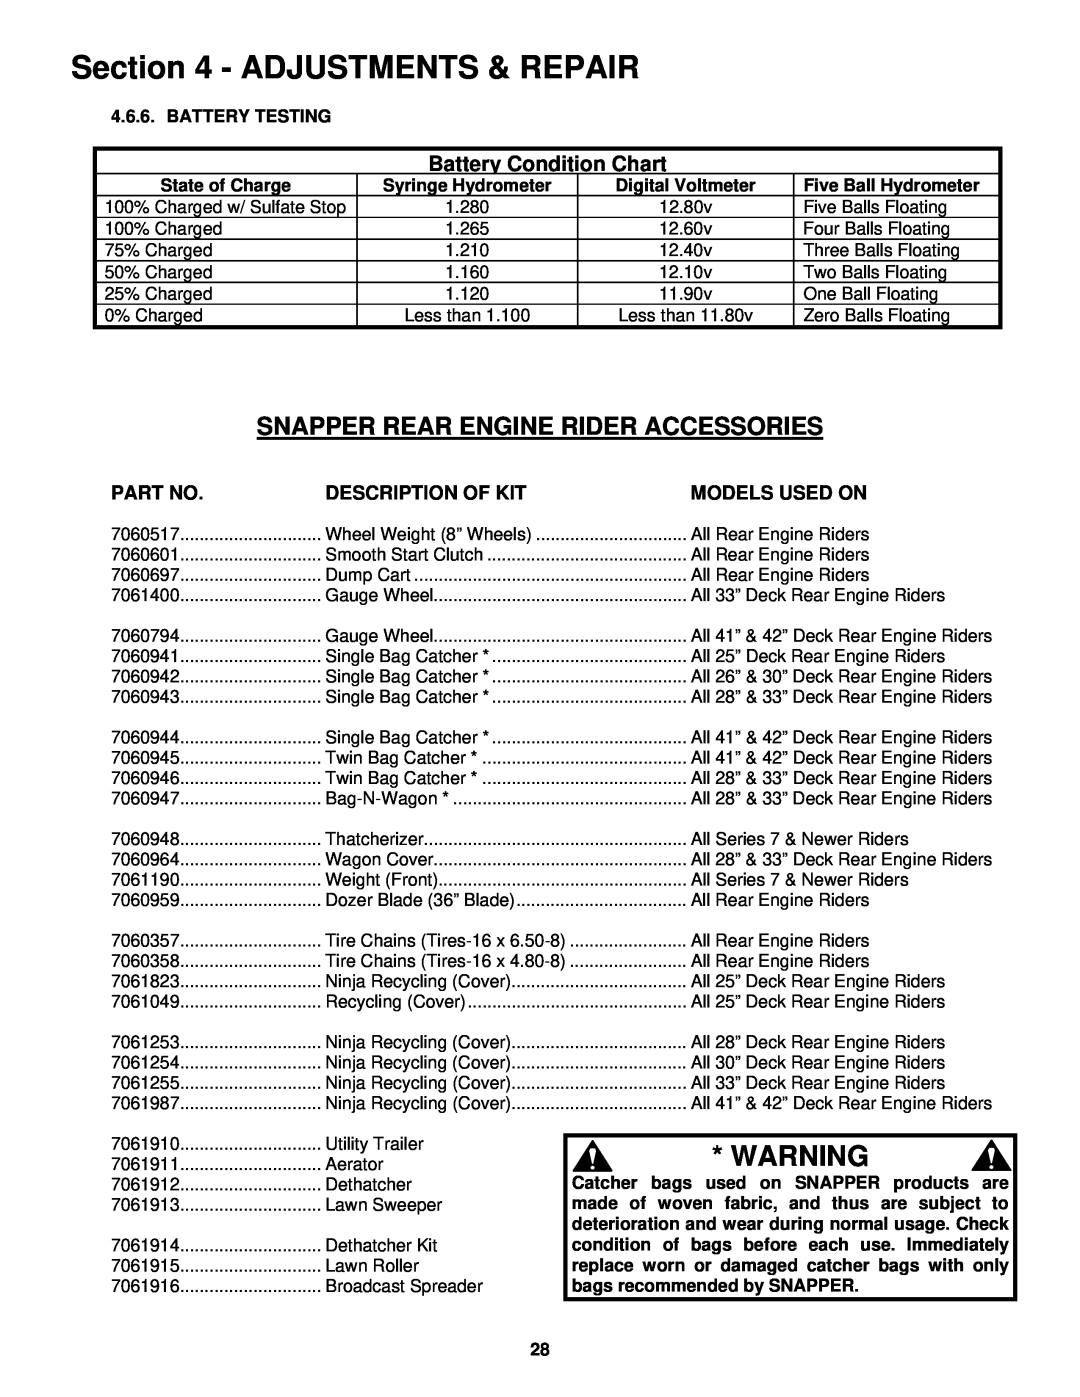 Snapper Snapper Rear Engine Rider Accessories, Adjustments & Repair, Battery Condition Chart, Description Of Kit 